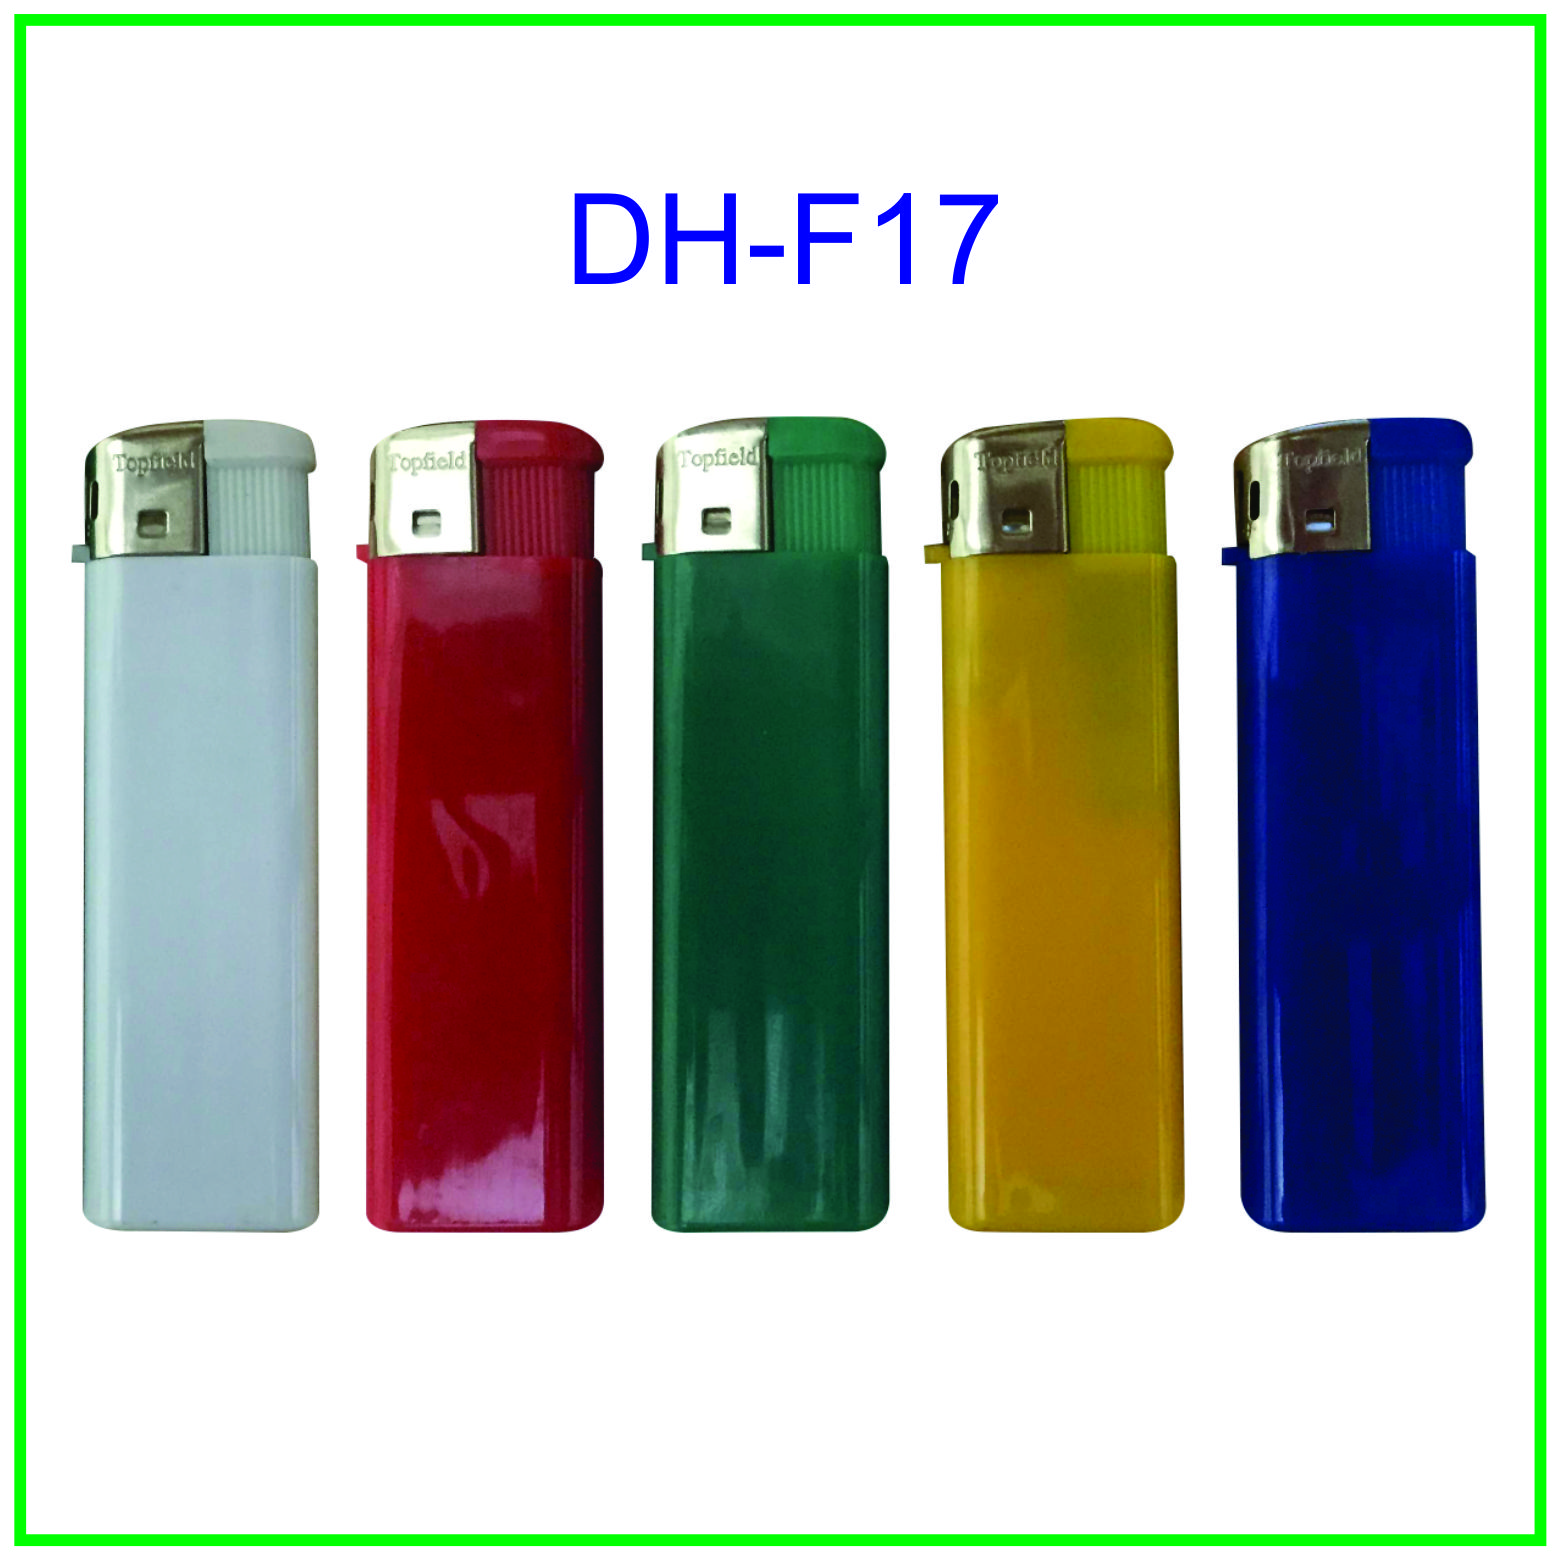 dhf17